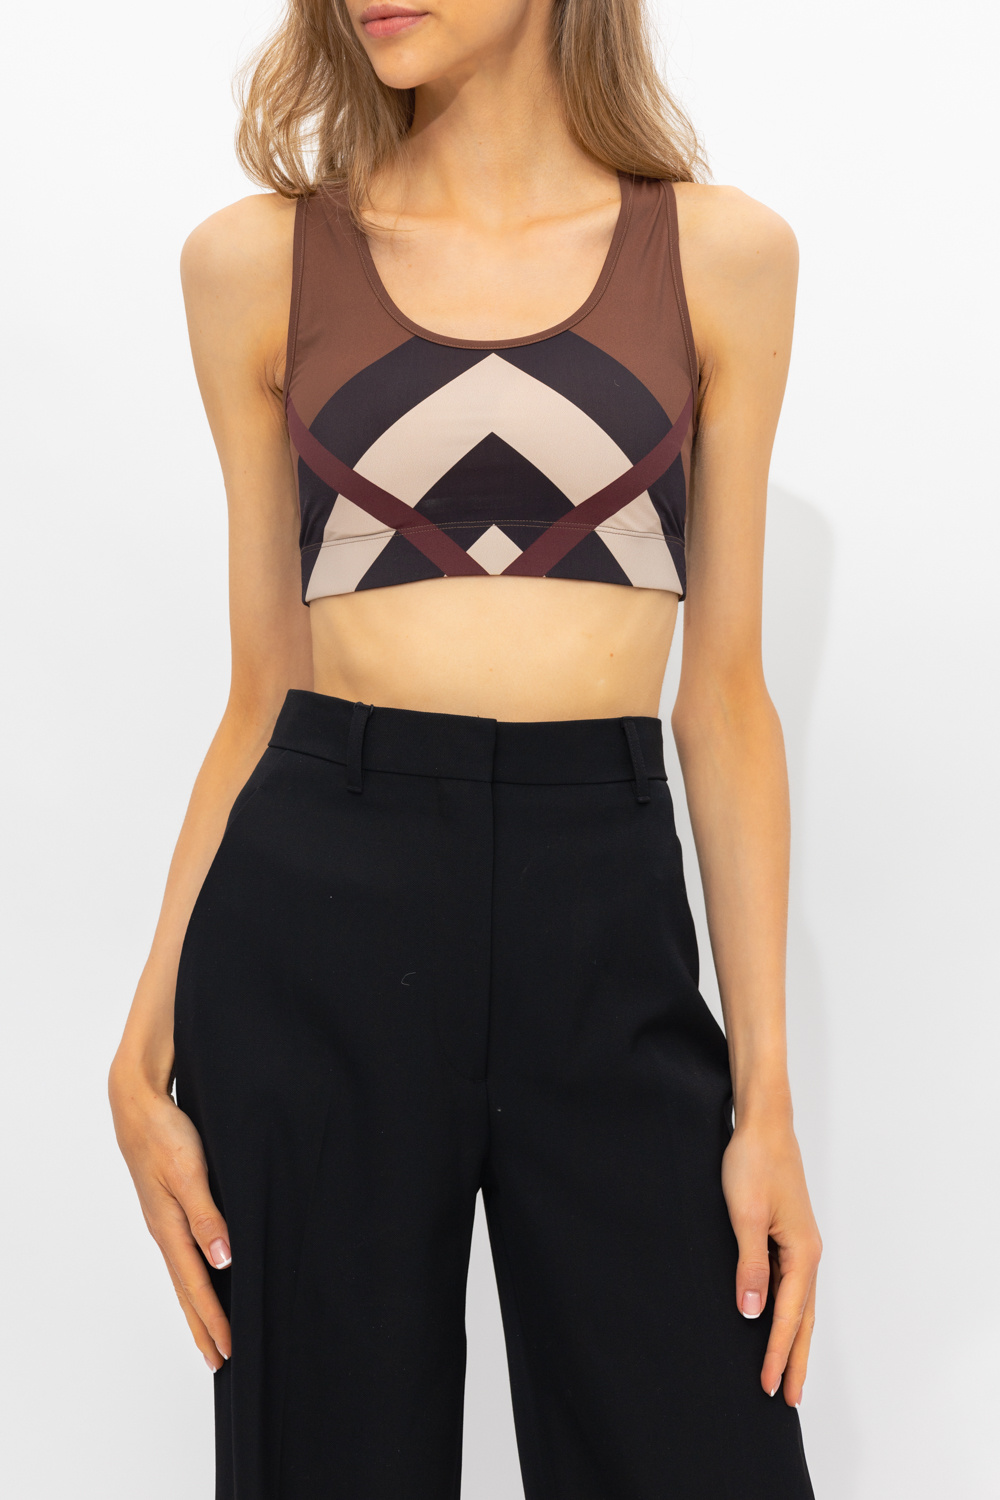 Burberry ‘Immy’ cropped top